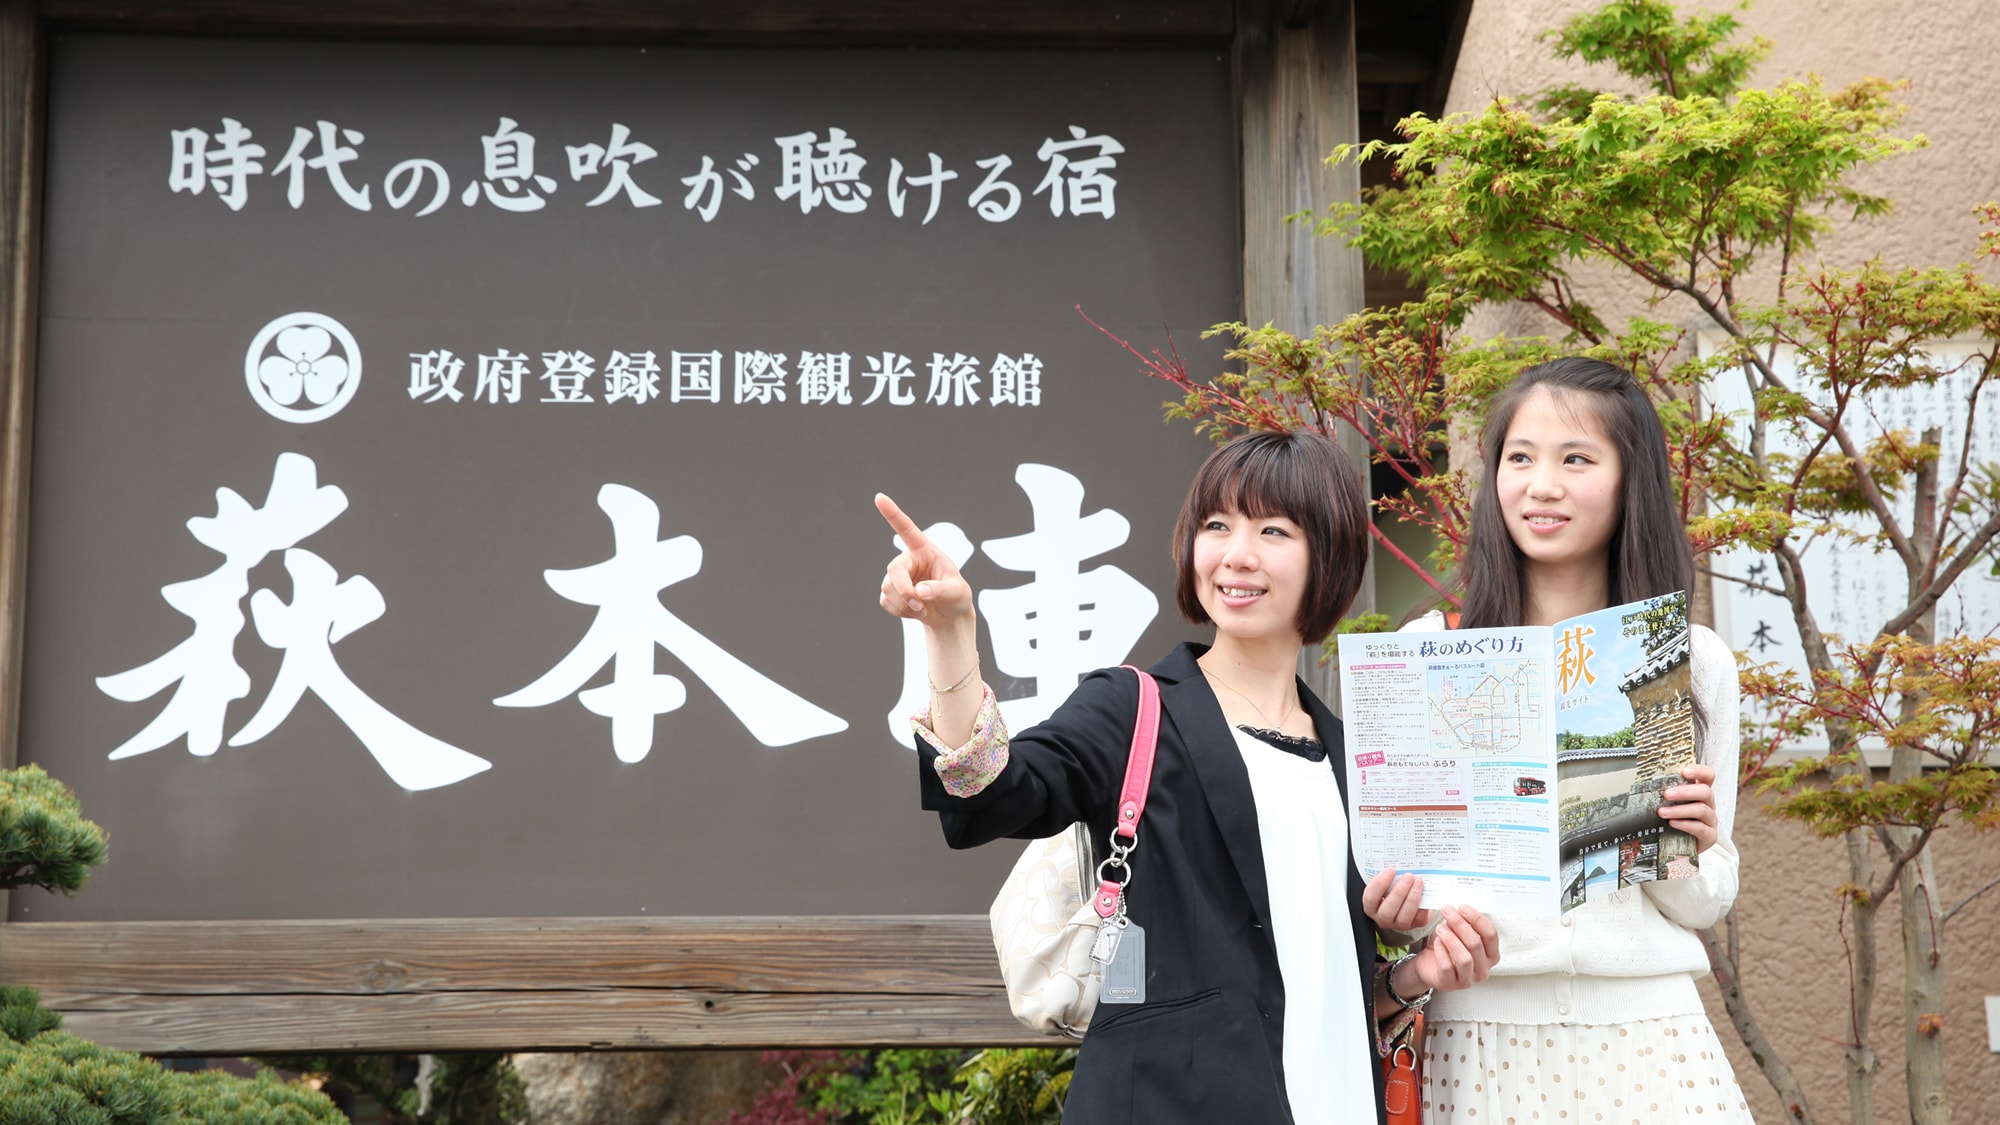 [Welcome to Hagihonjin] Let's think about the end of the Edo period and visit Hagi, the land of the Meiji Restoration.